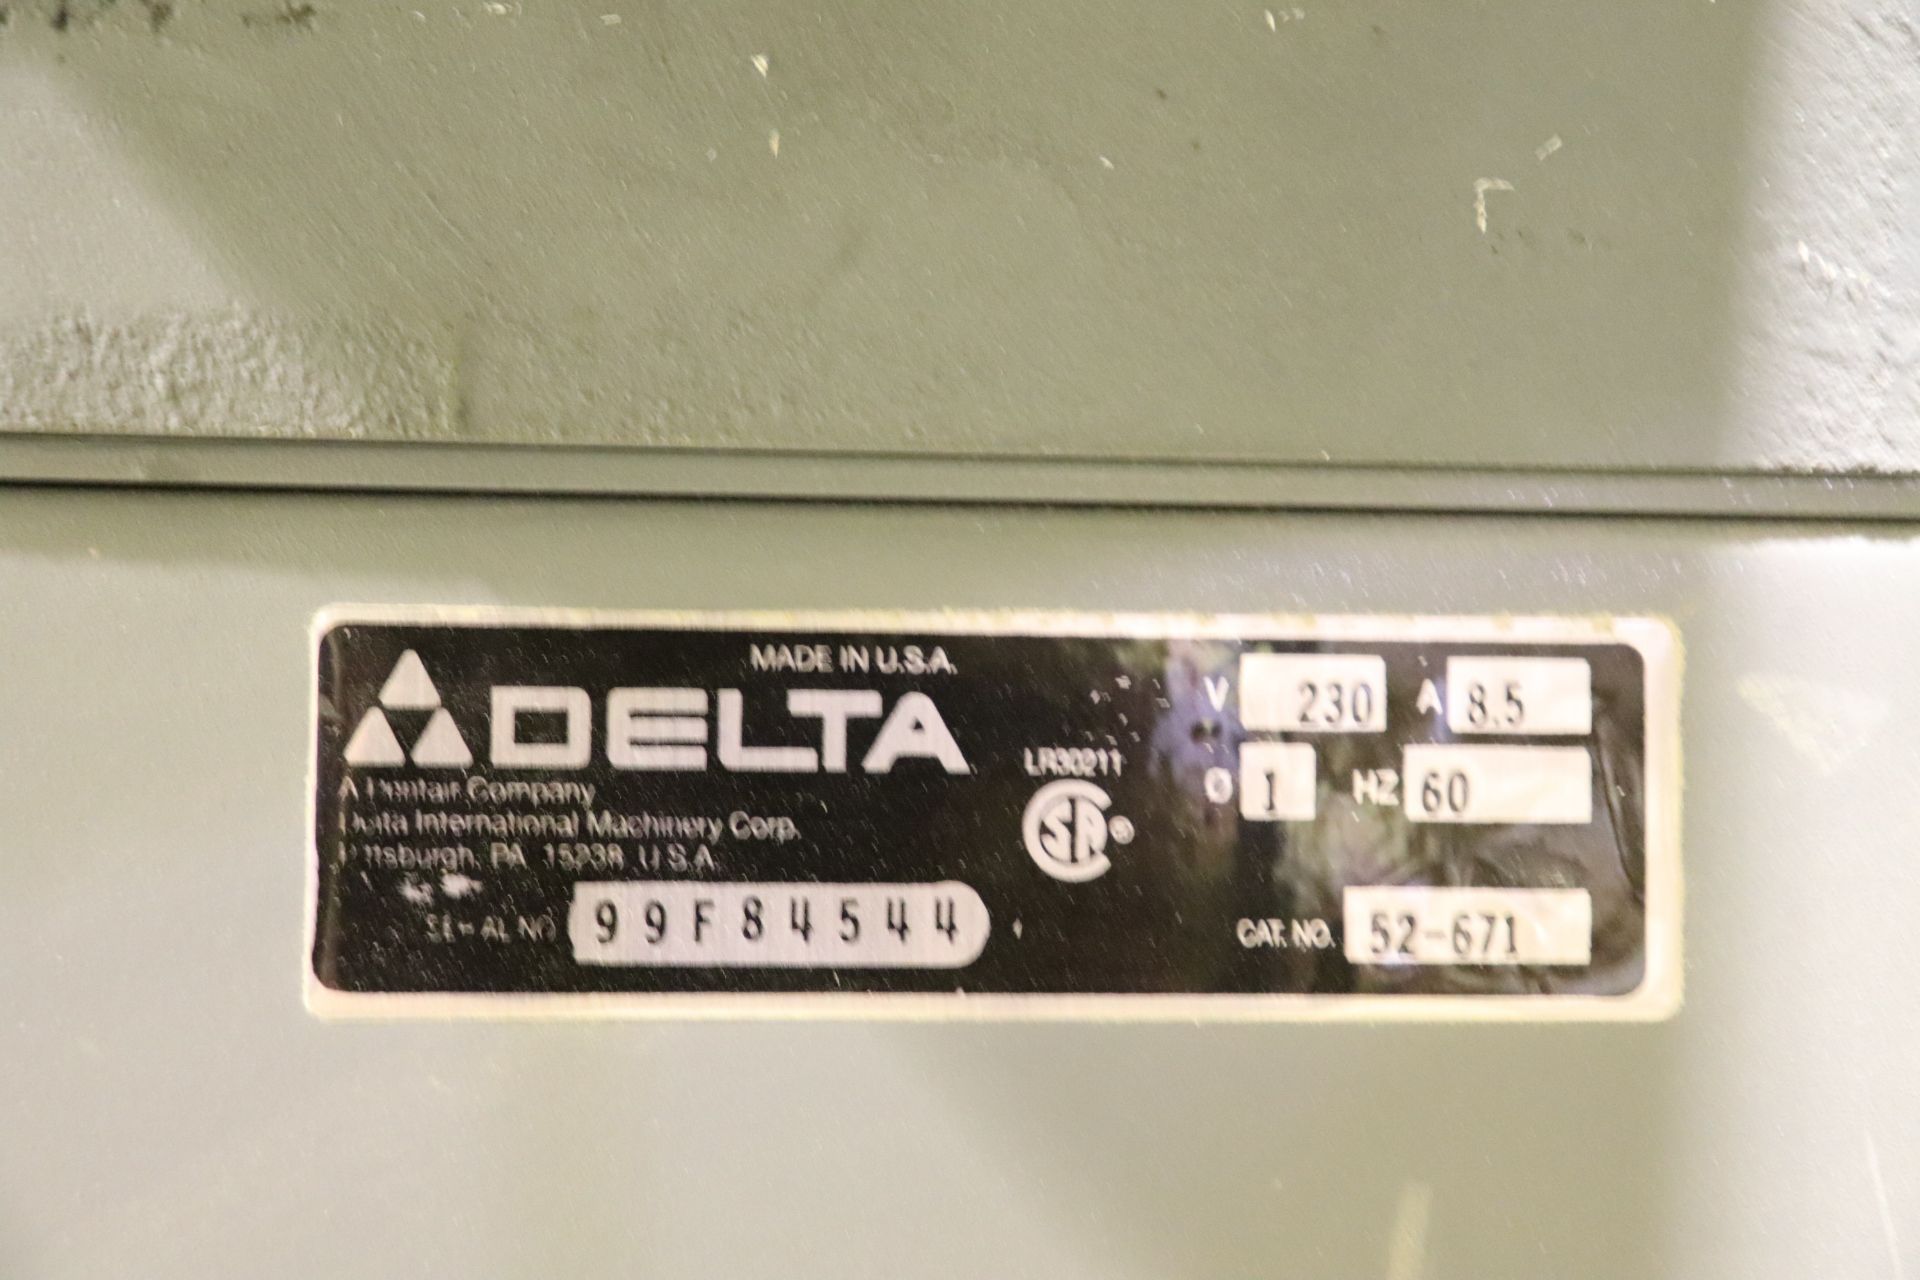 Delta DJ20 long bed 8" wood jointer, serial 99F84544 - Image 3 of 3